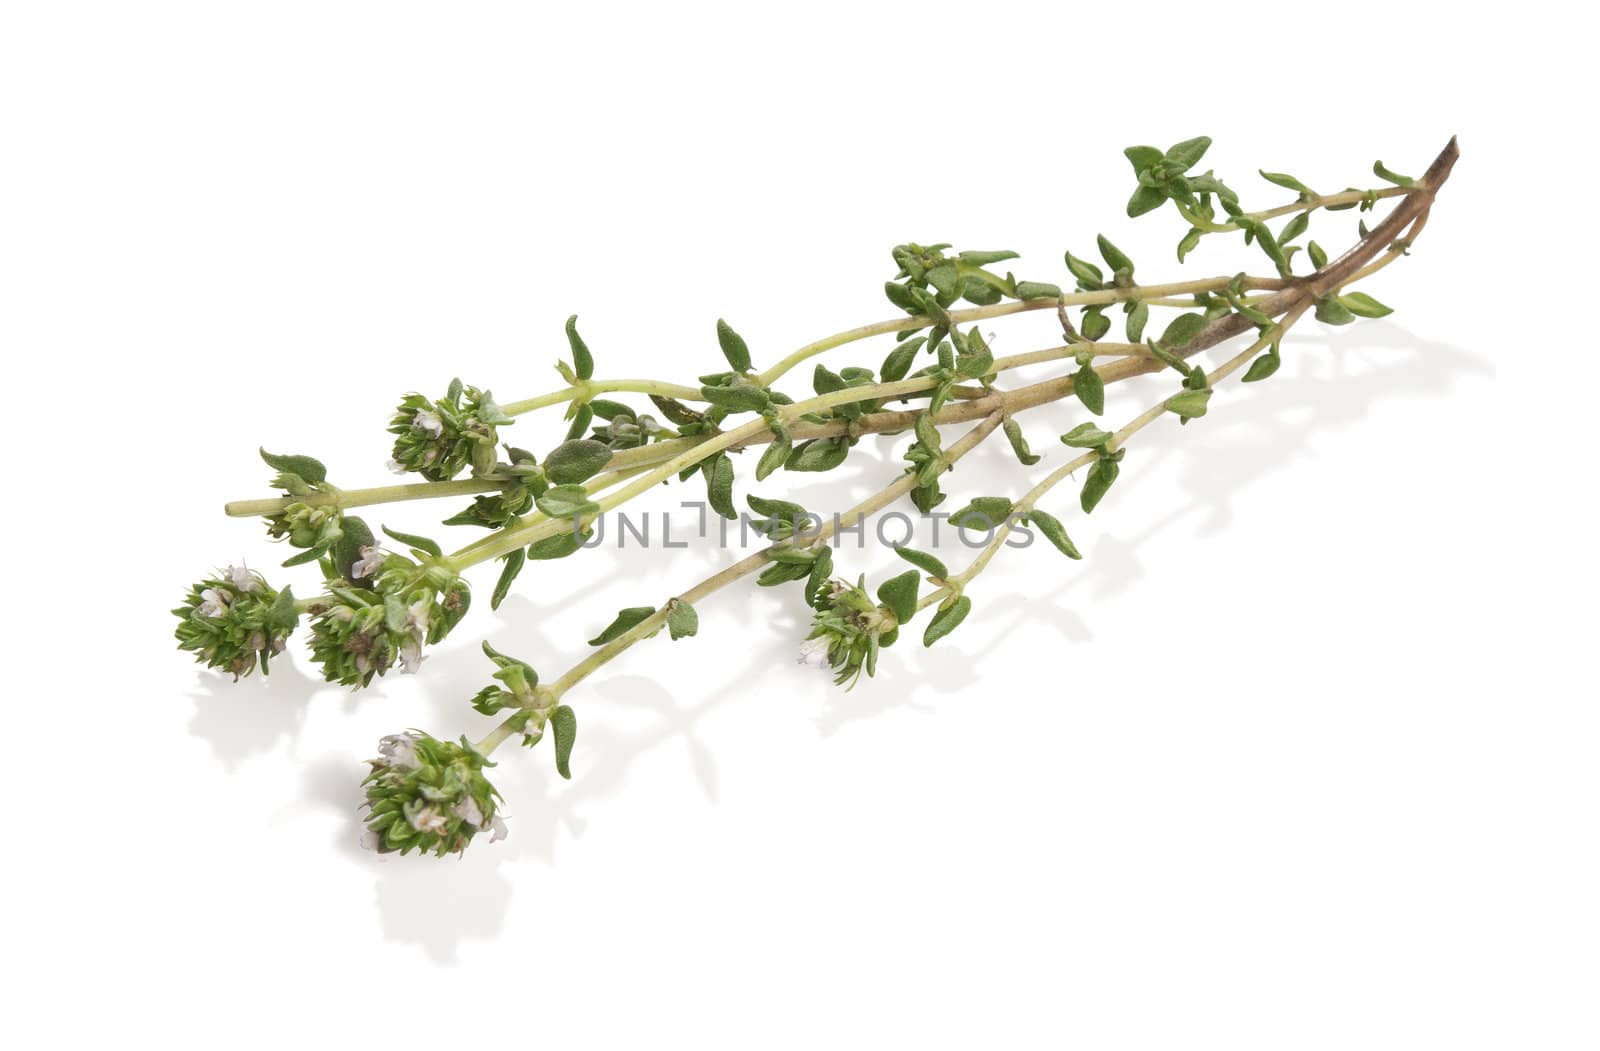 Isolated branch of thyme on the white background